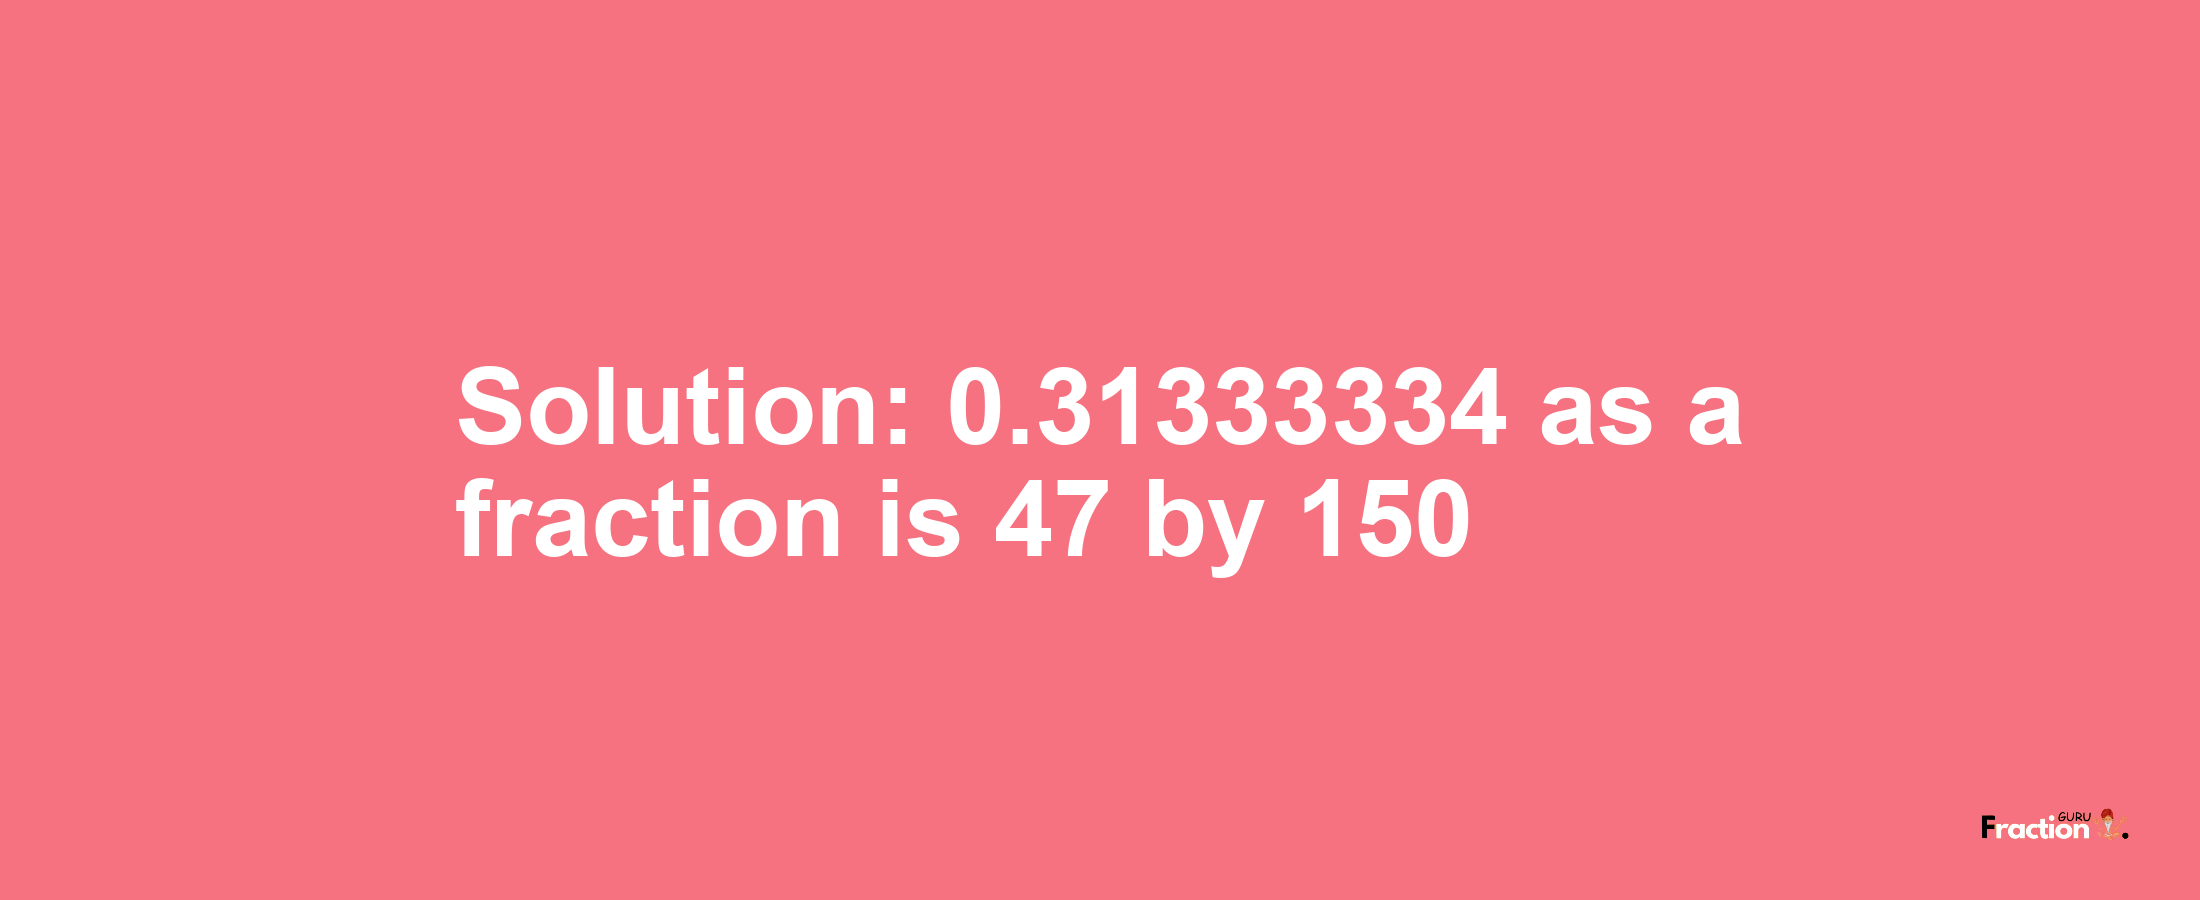 Solution:0.31333334 as a fraction is 47/150